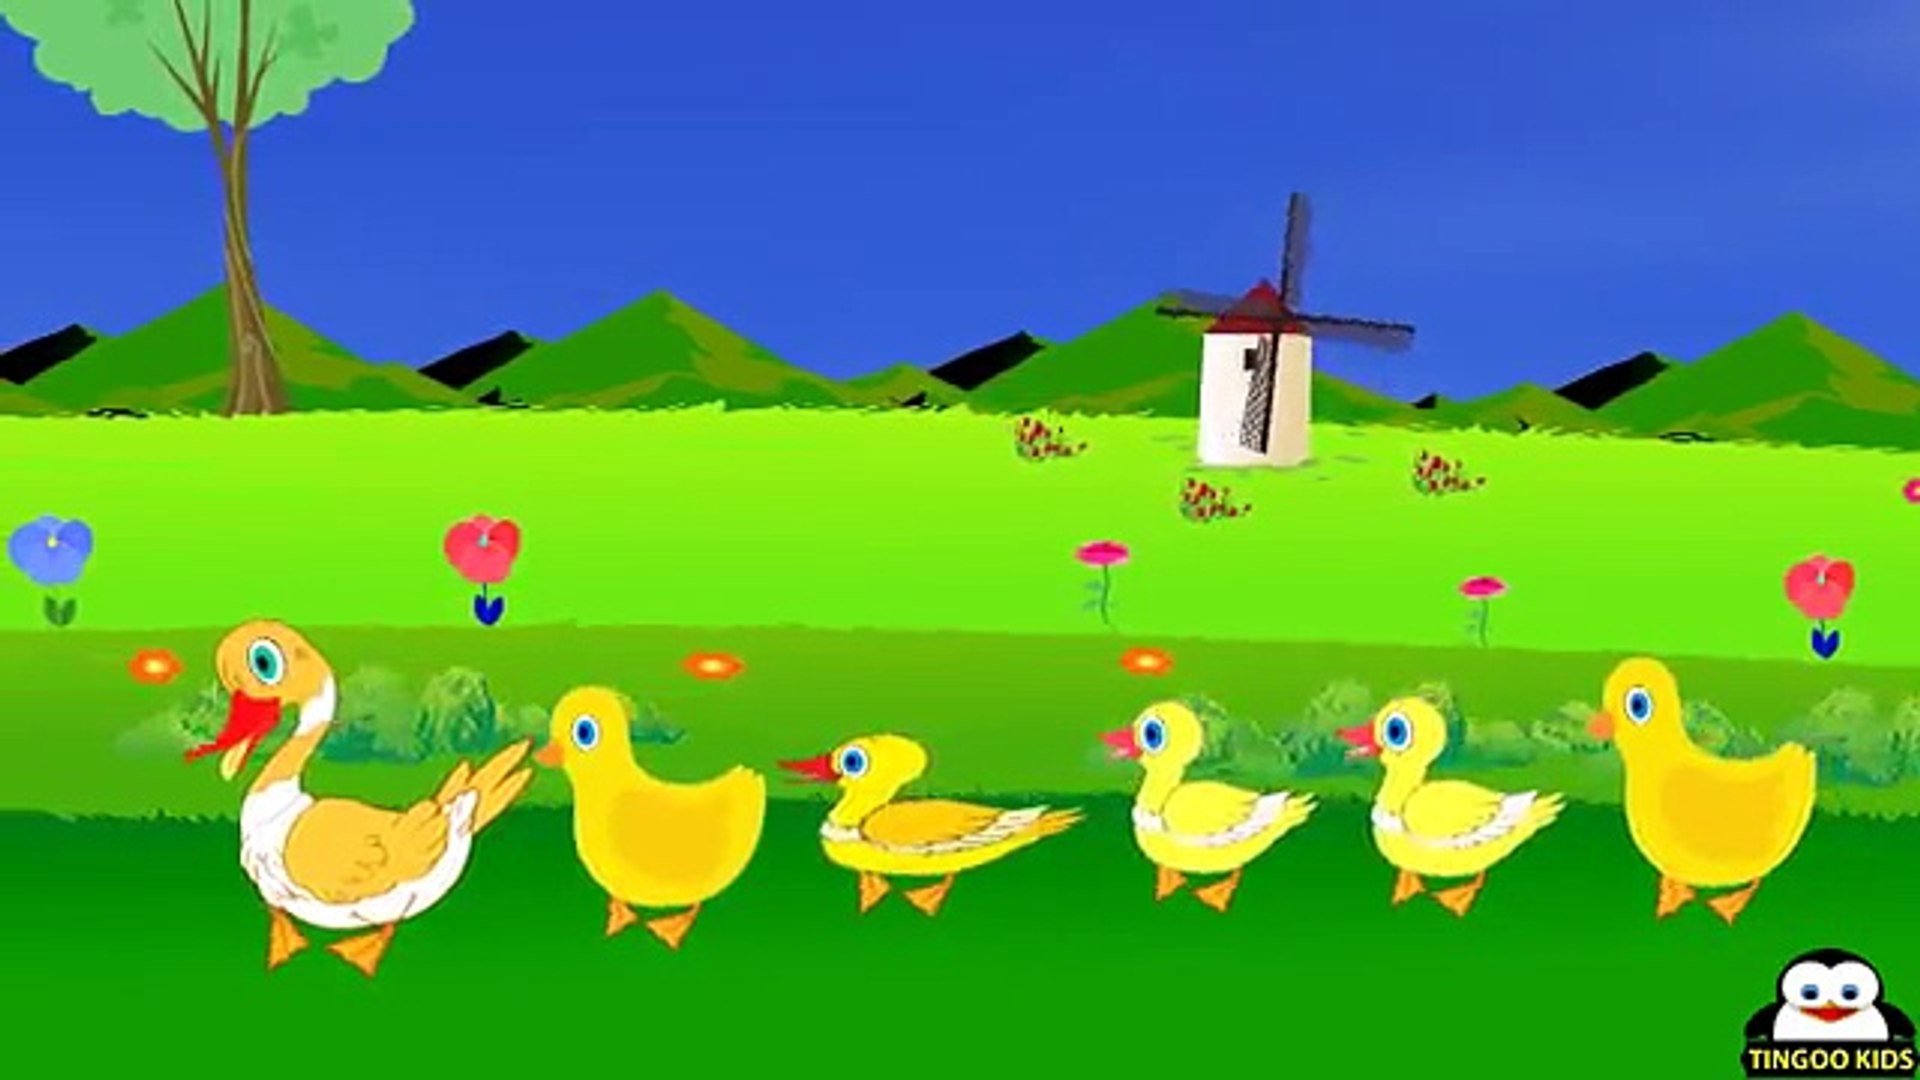 Nursery Rhymes Six Little Ducks   One Little Duck With Feathers On His Back  Kids Songs Lyrics